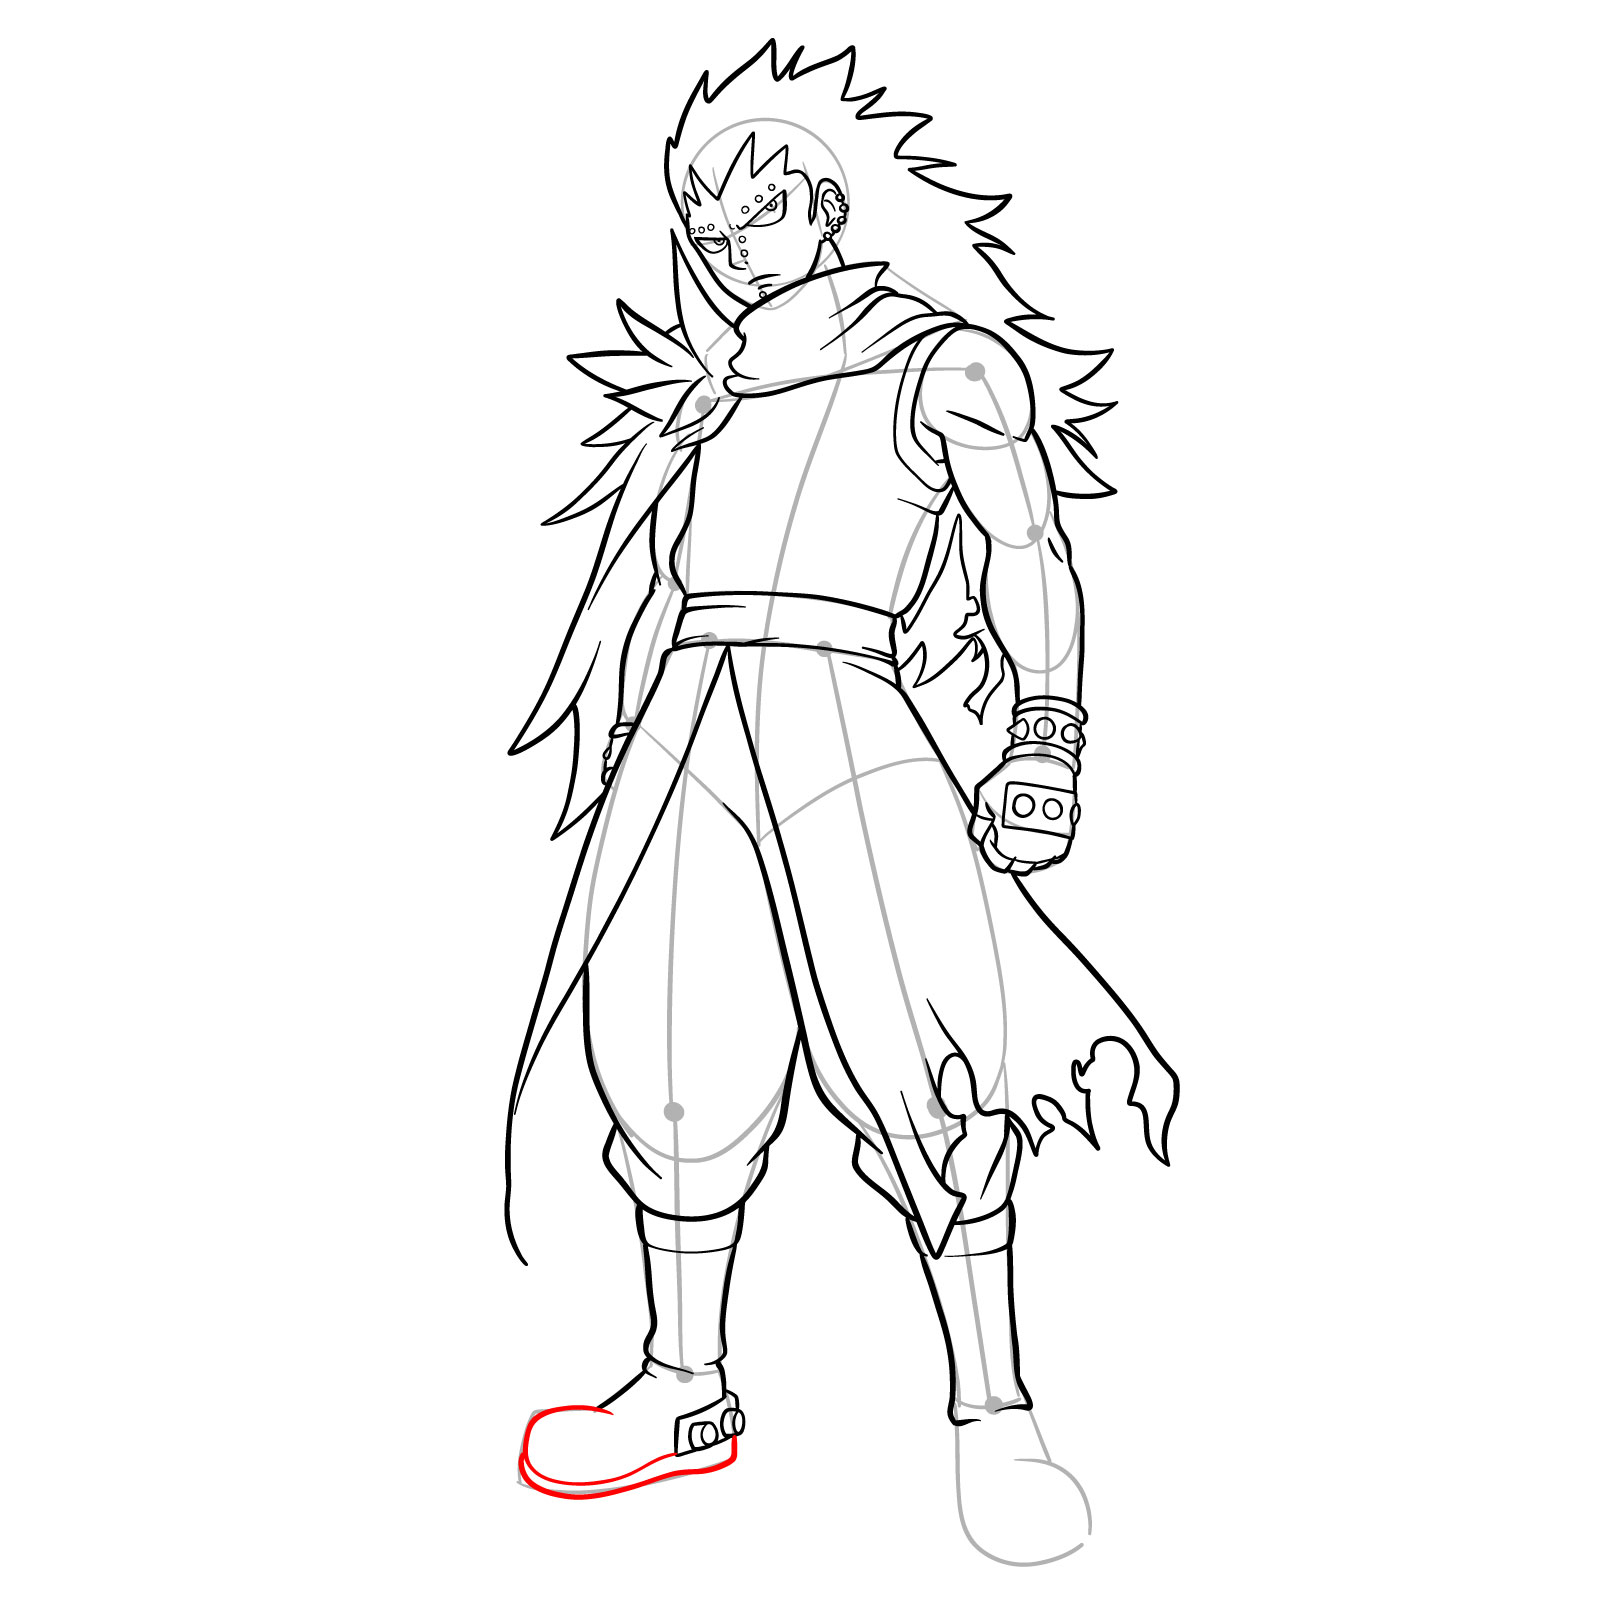 How to draw Gajeel Redfox from Fairy Tail - step 35